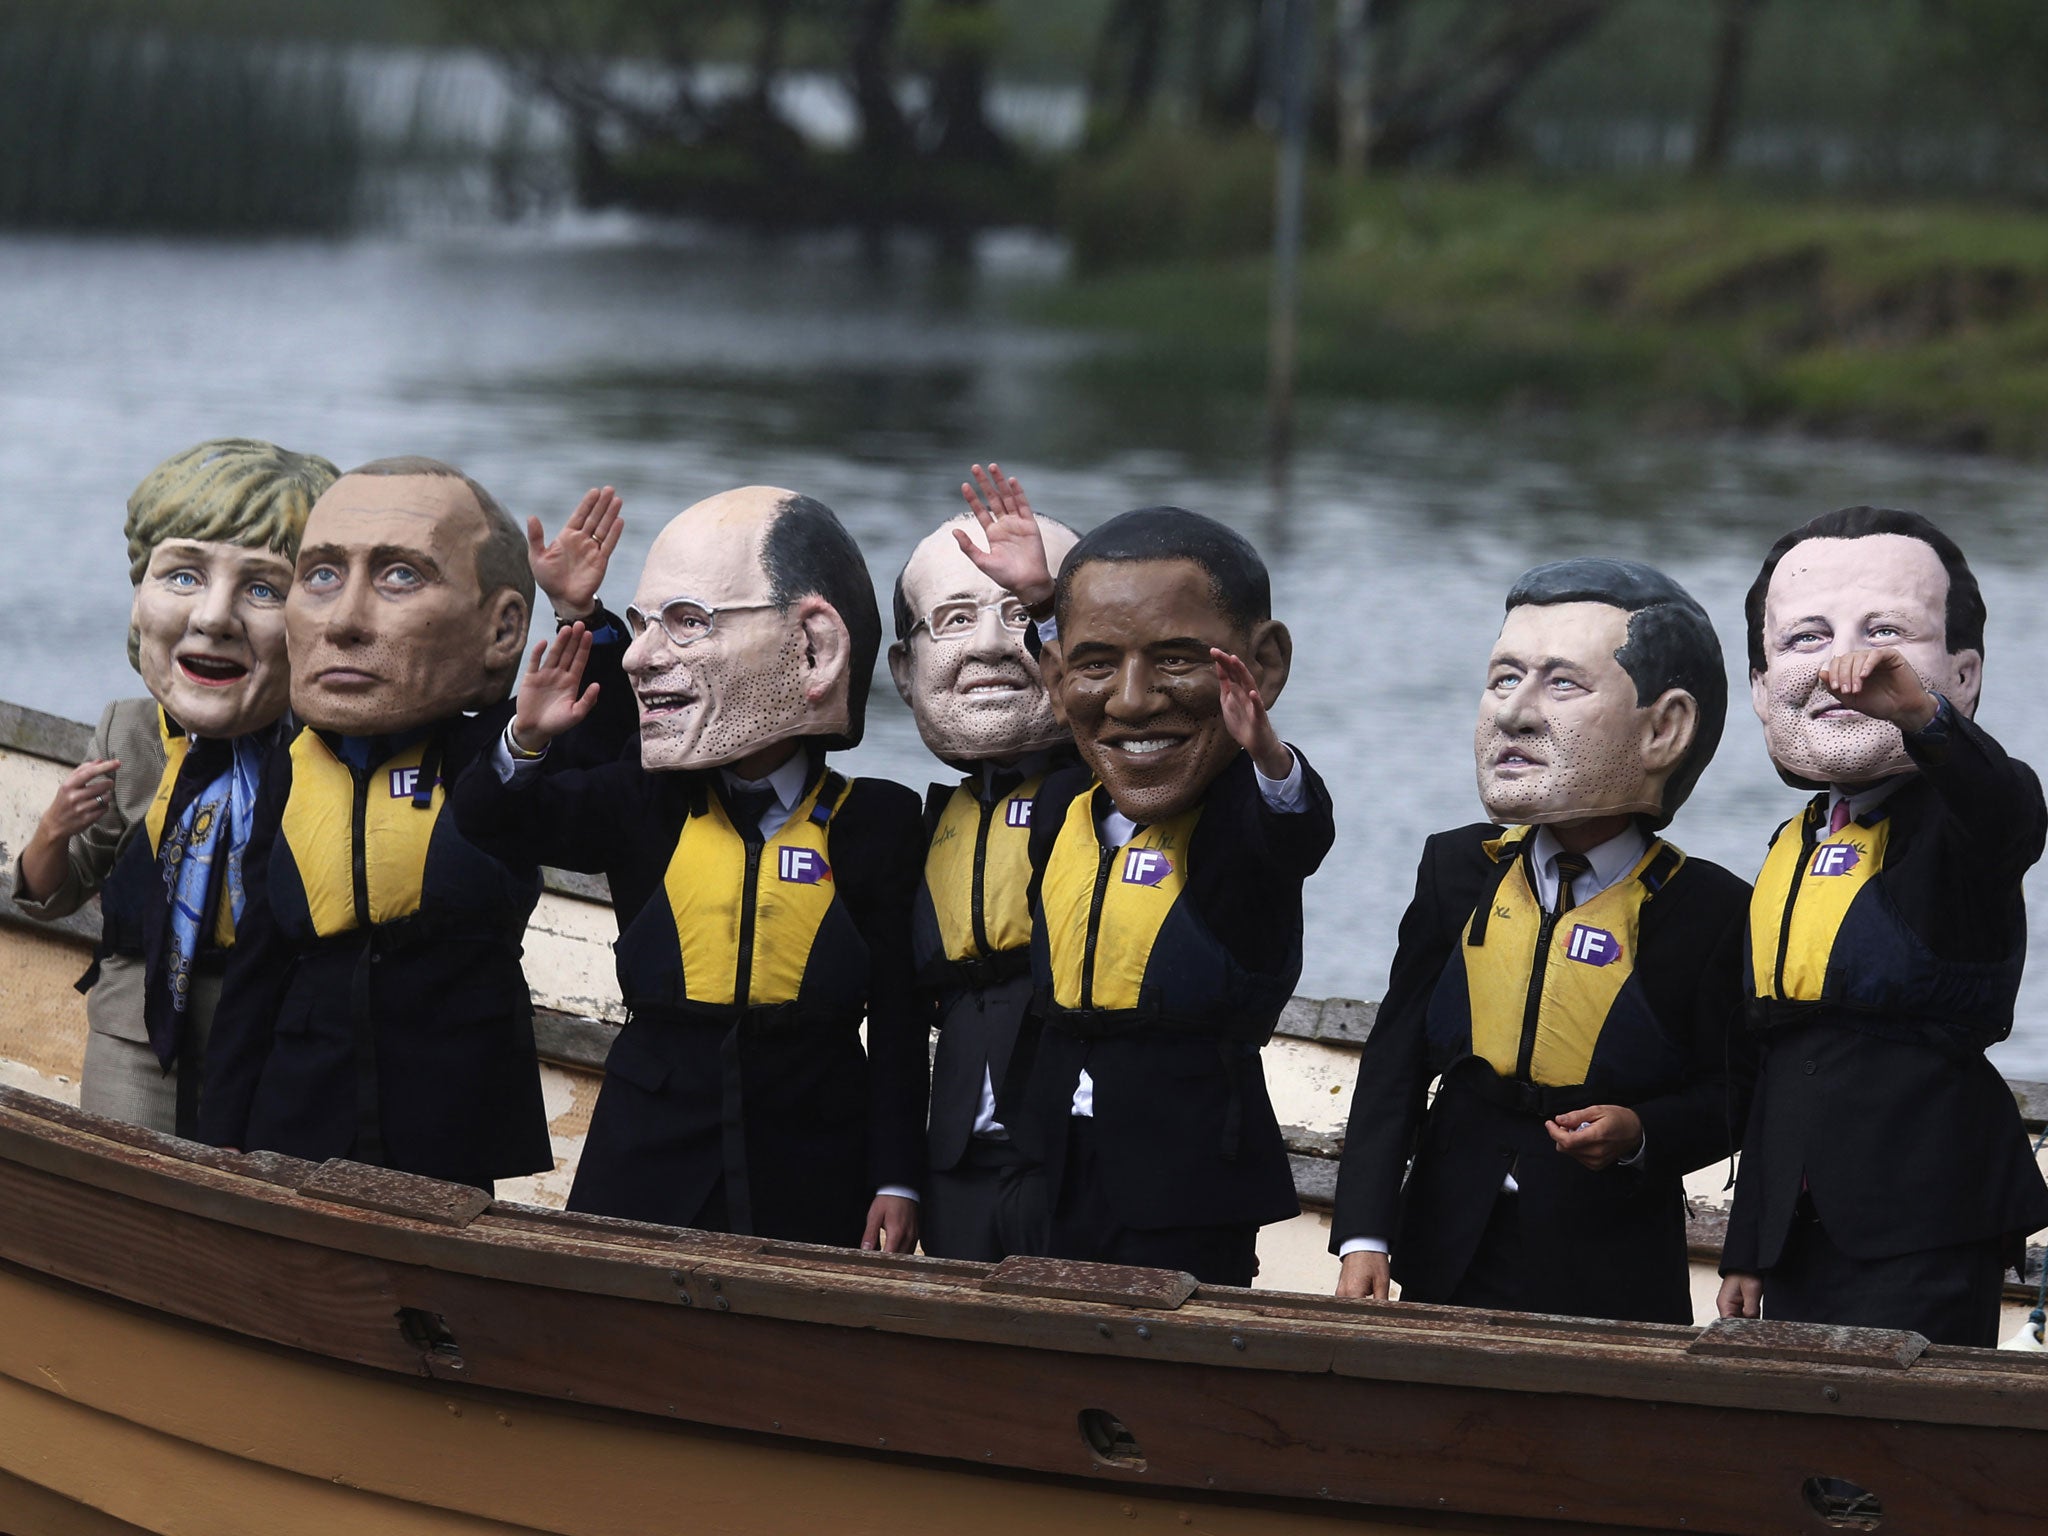 Anti-hunger activists wear giant head masks depicting the G8 leaders